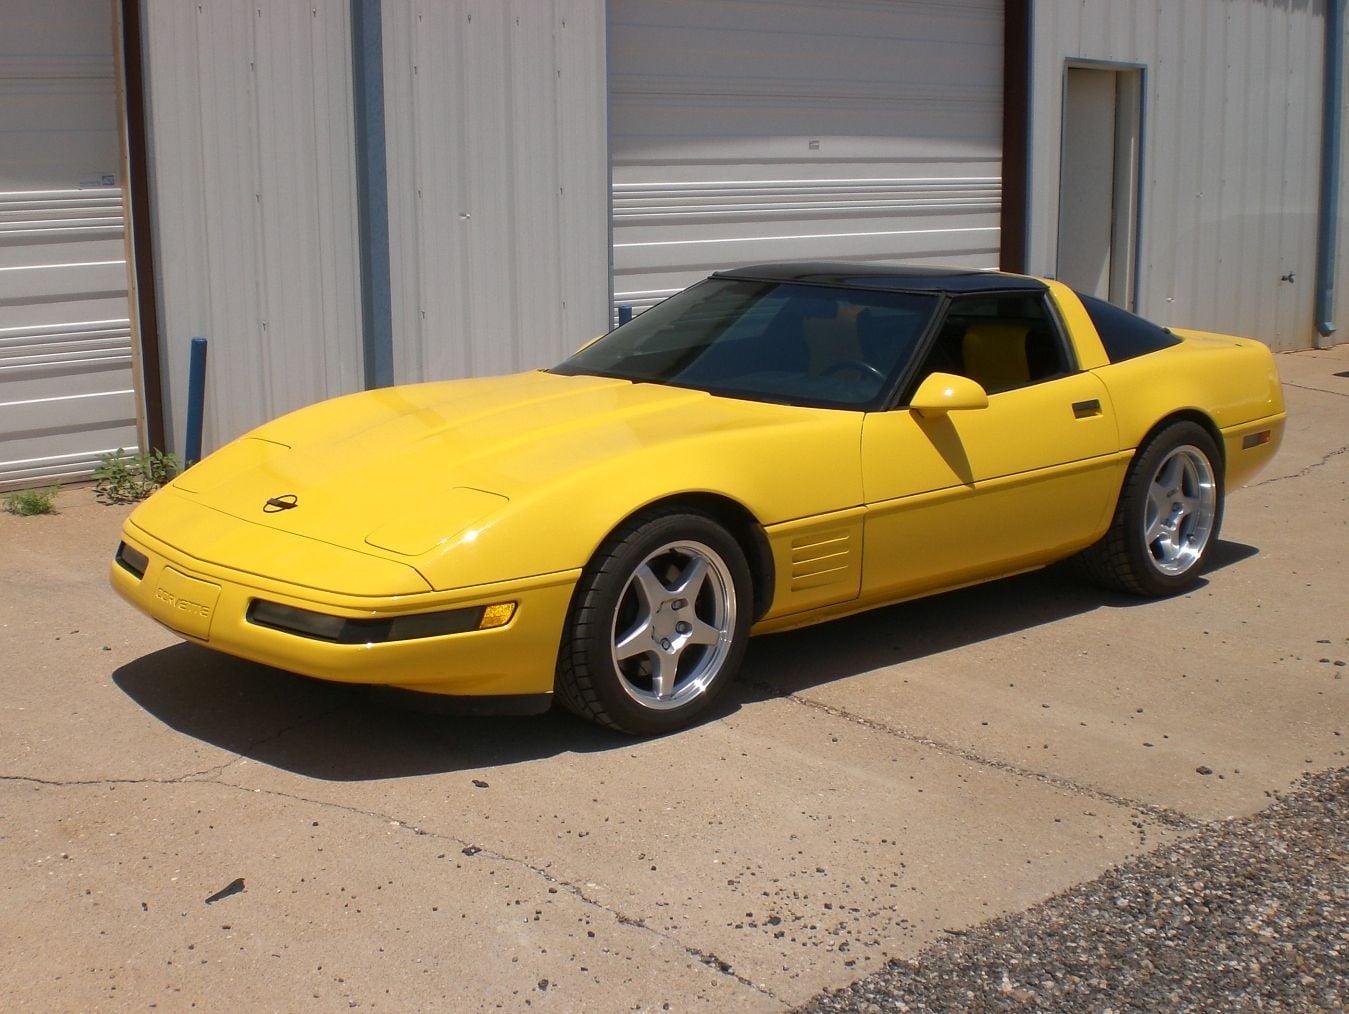 1991 Chevrolet Corvette - 1991 Chevy Corvette - Used - VIN 1G1YY2388M5107274 - 182,000 Miles - 8 cyl - 2WD - Automatic - Hatchback - Yellow - Lubbock, TX 79424, United States